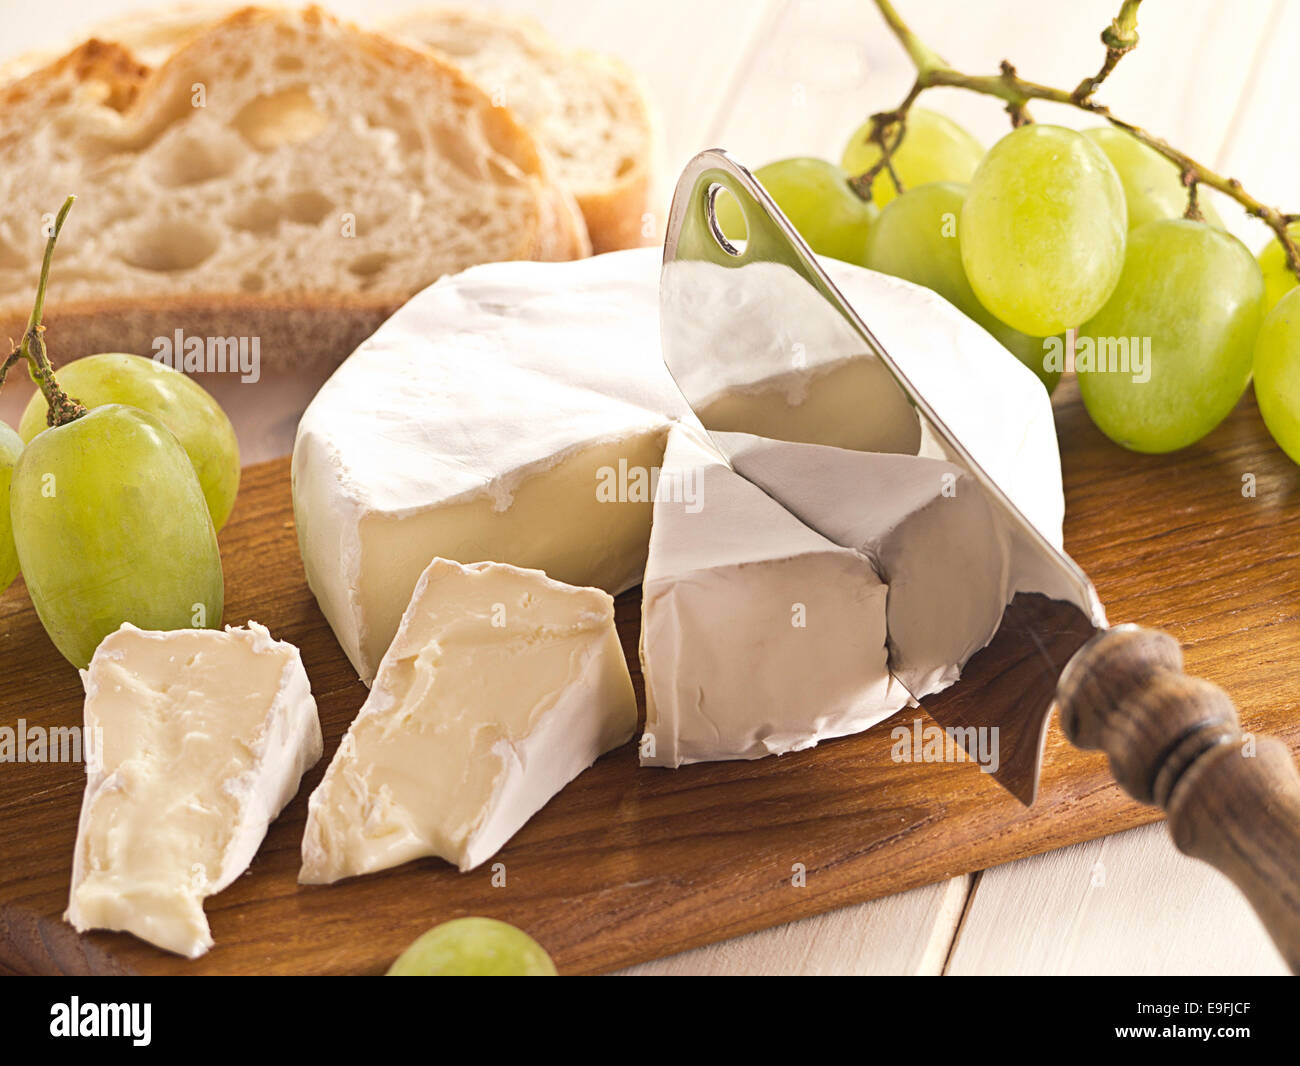 Cheese board with Camenbert and grapes Stock Photo